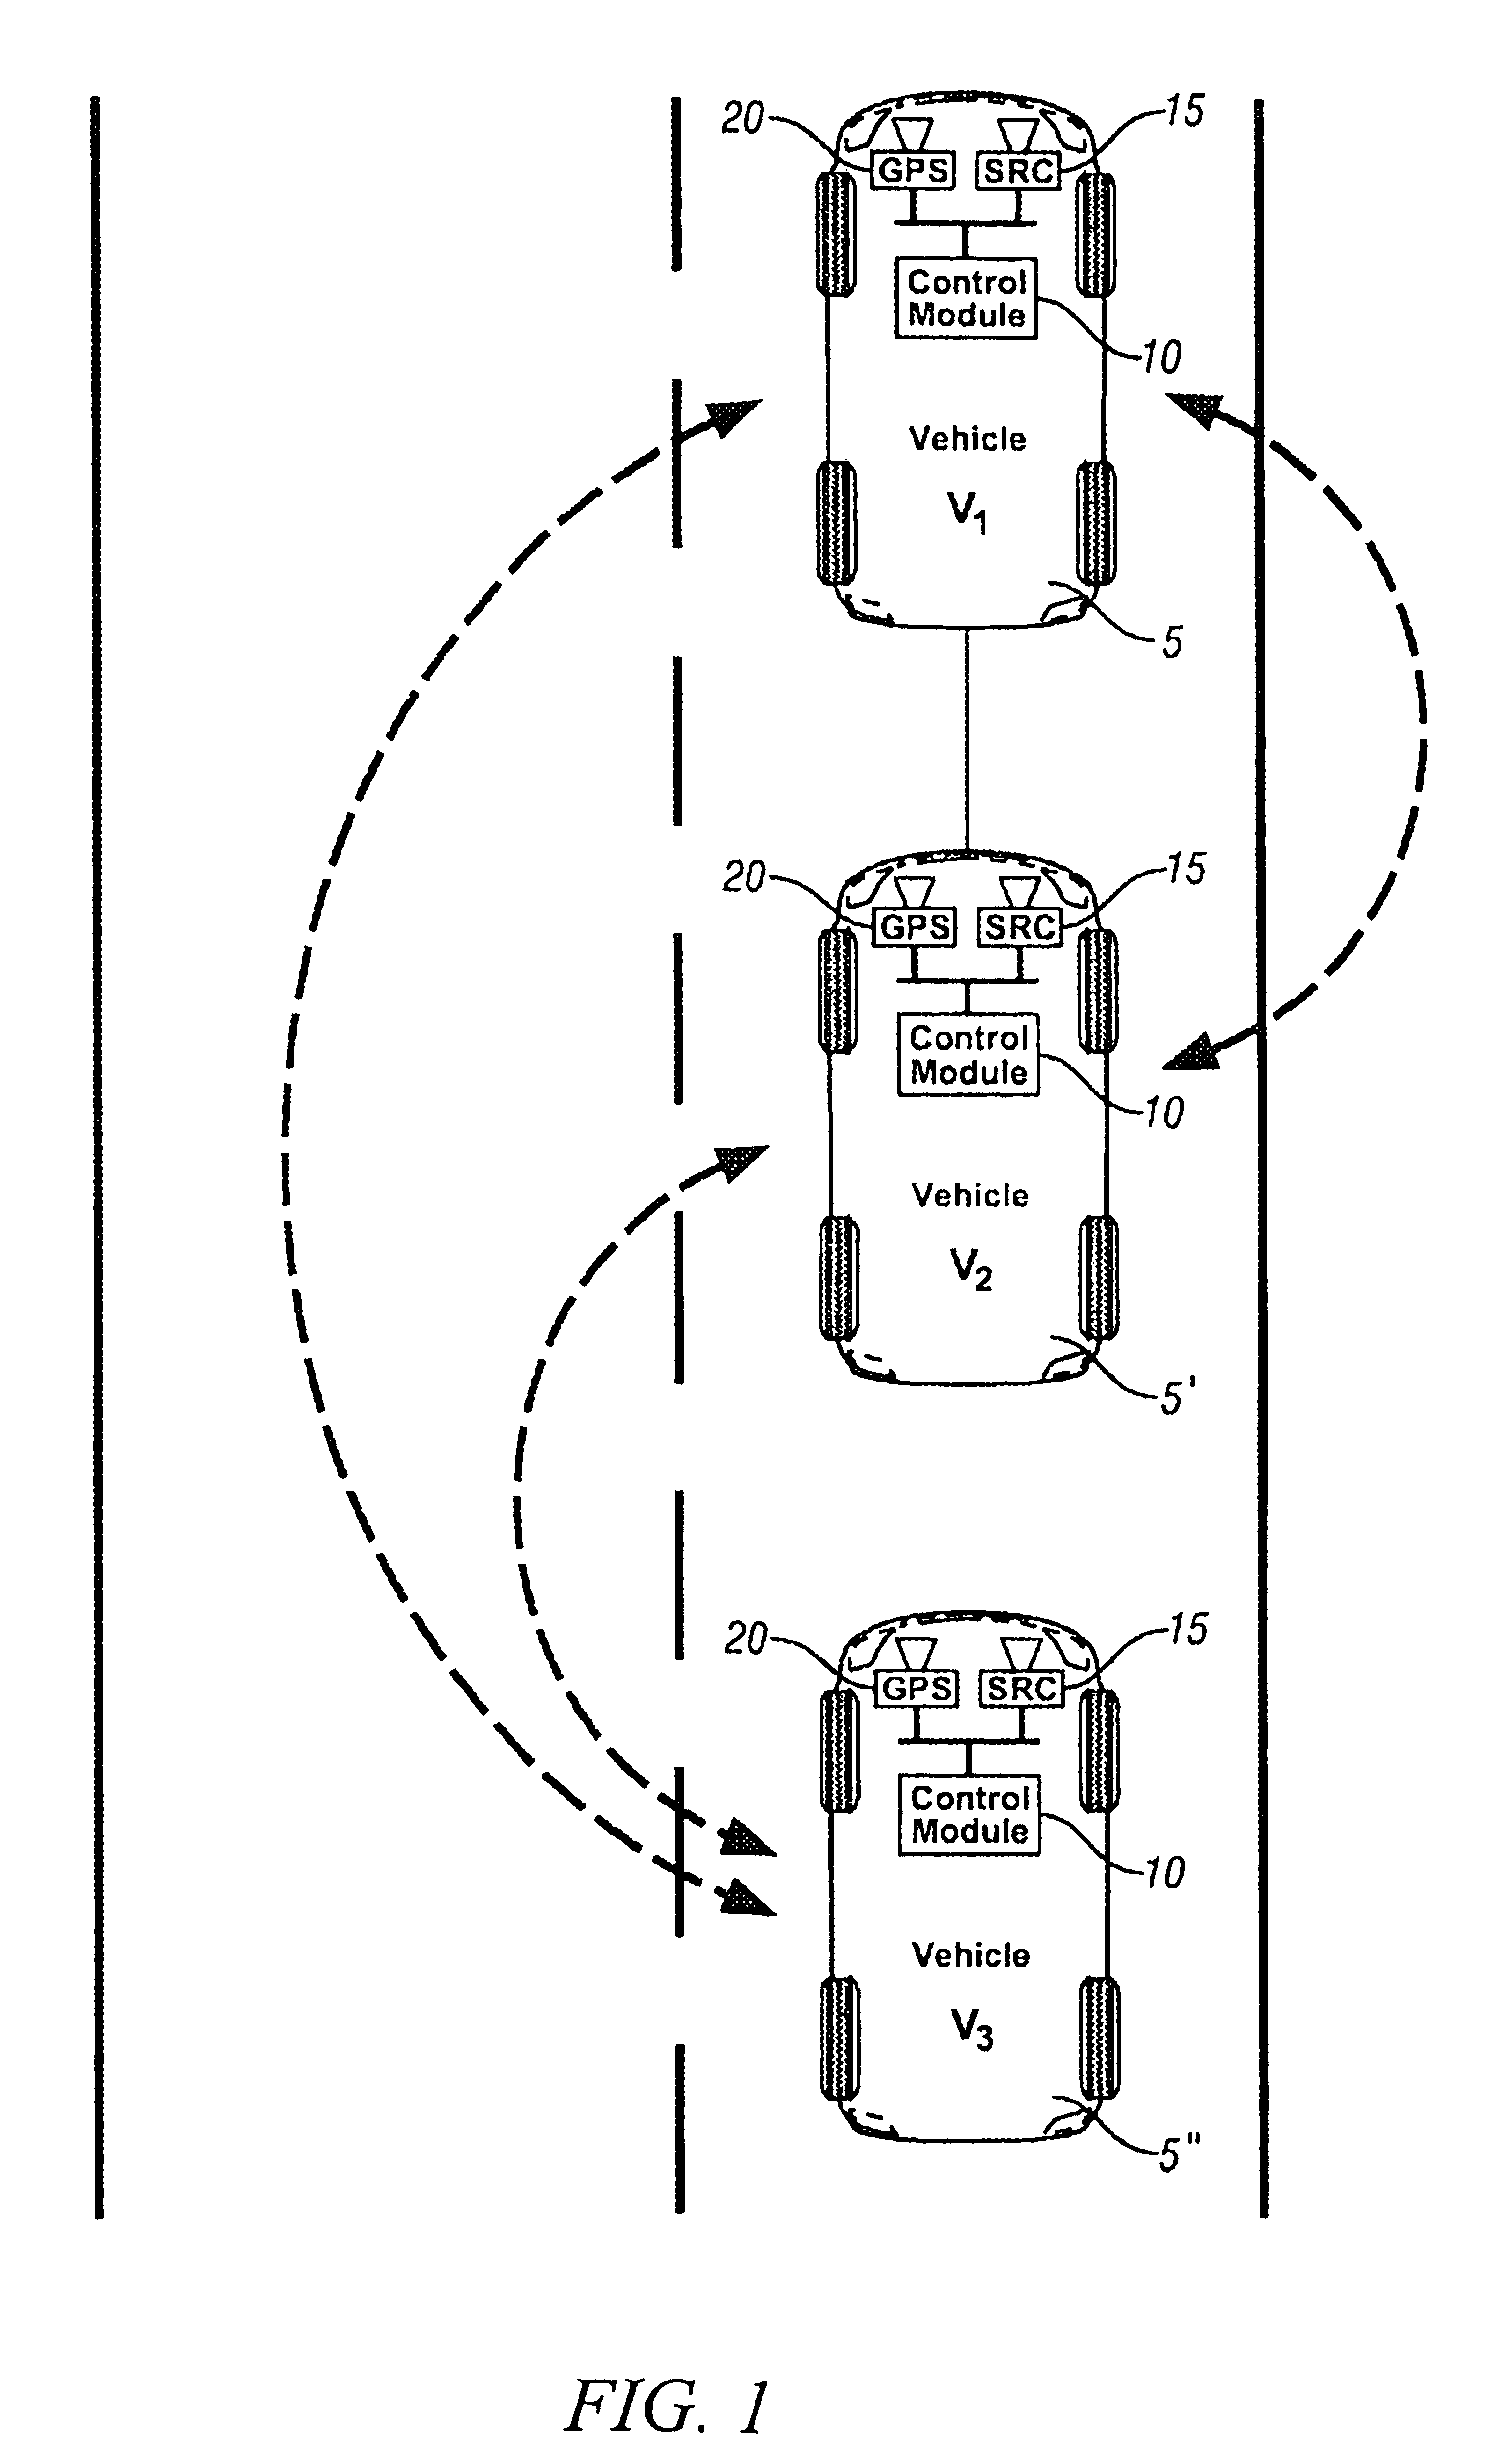 Method and apparatus to monitor ambient sensing devices